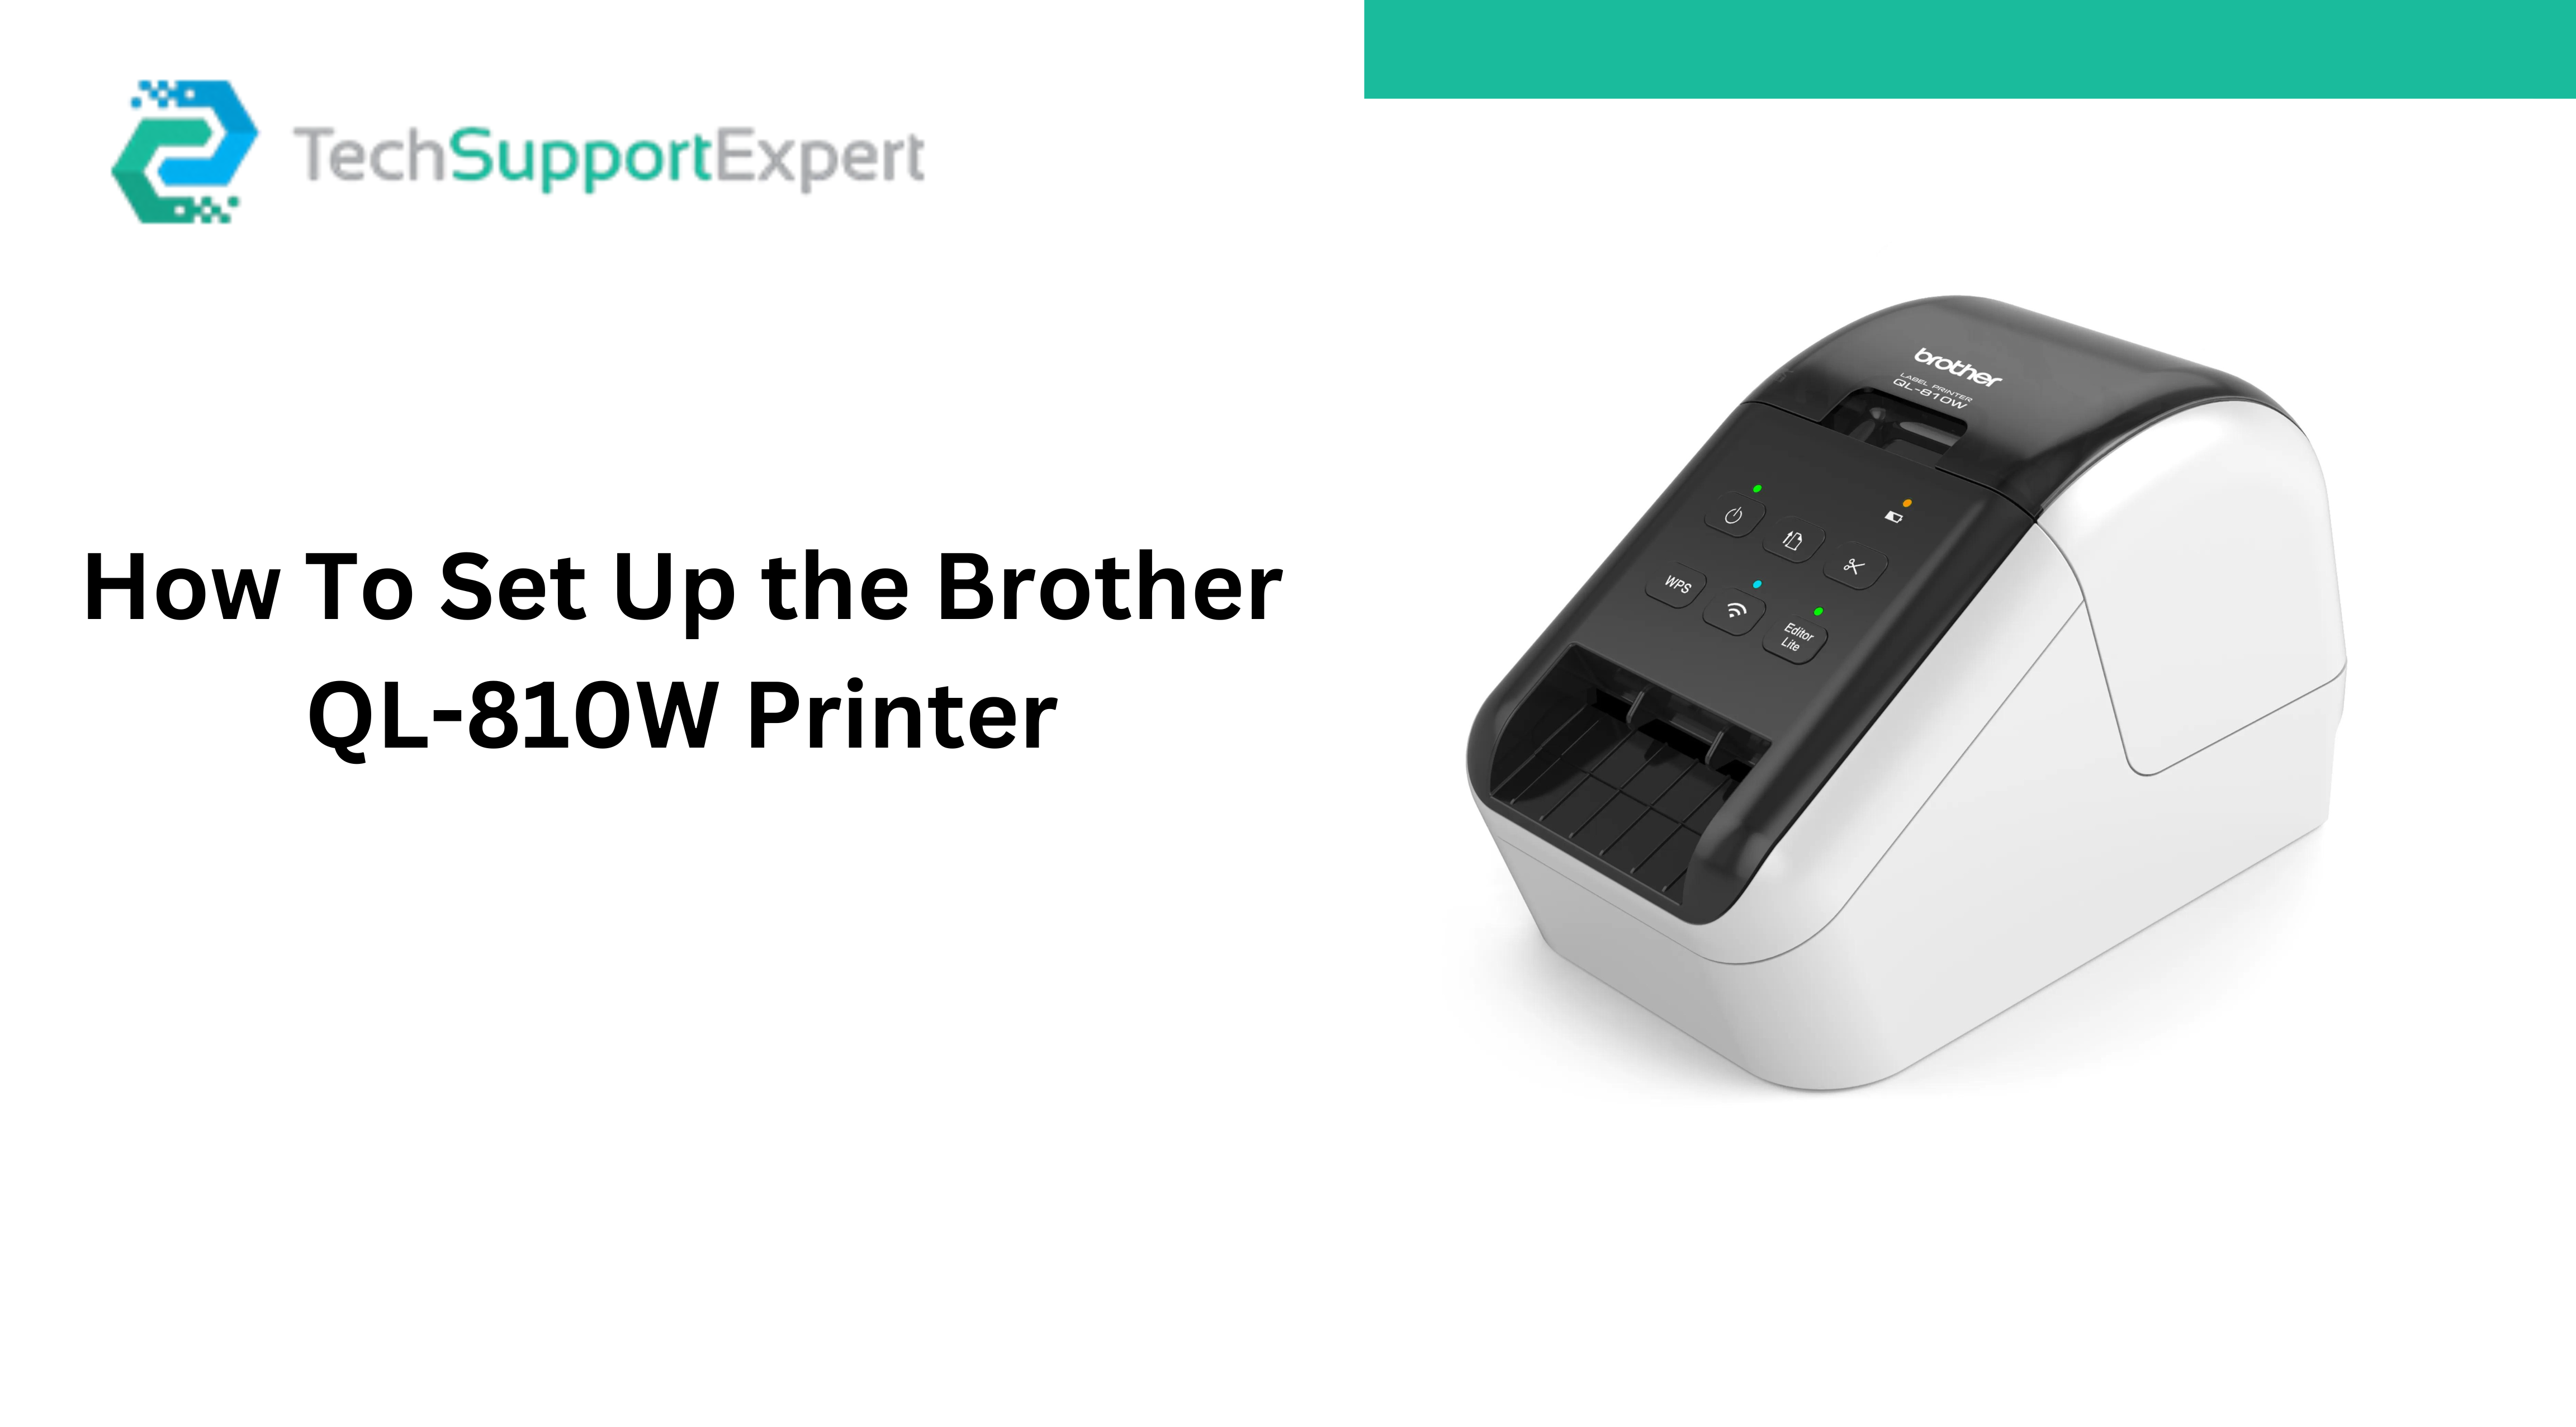 How To Set Up the Brother QL-810W Printer